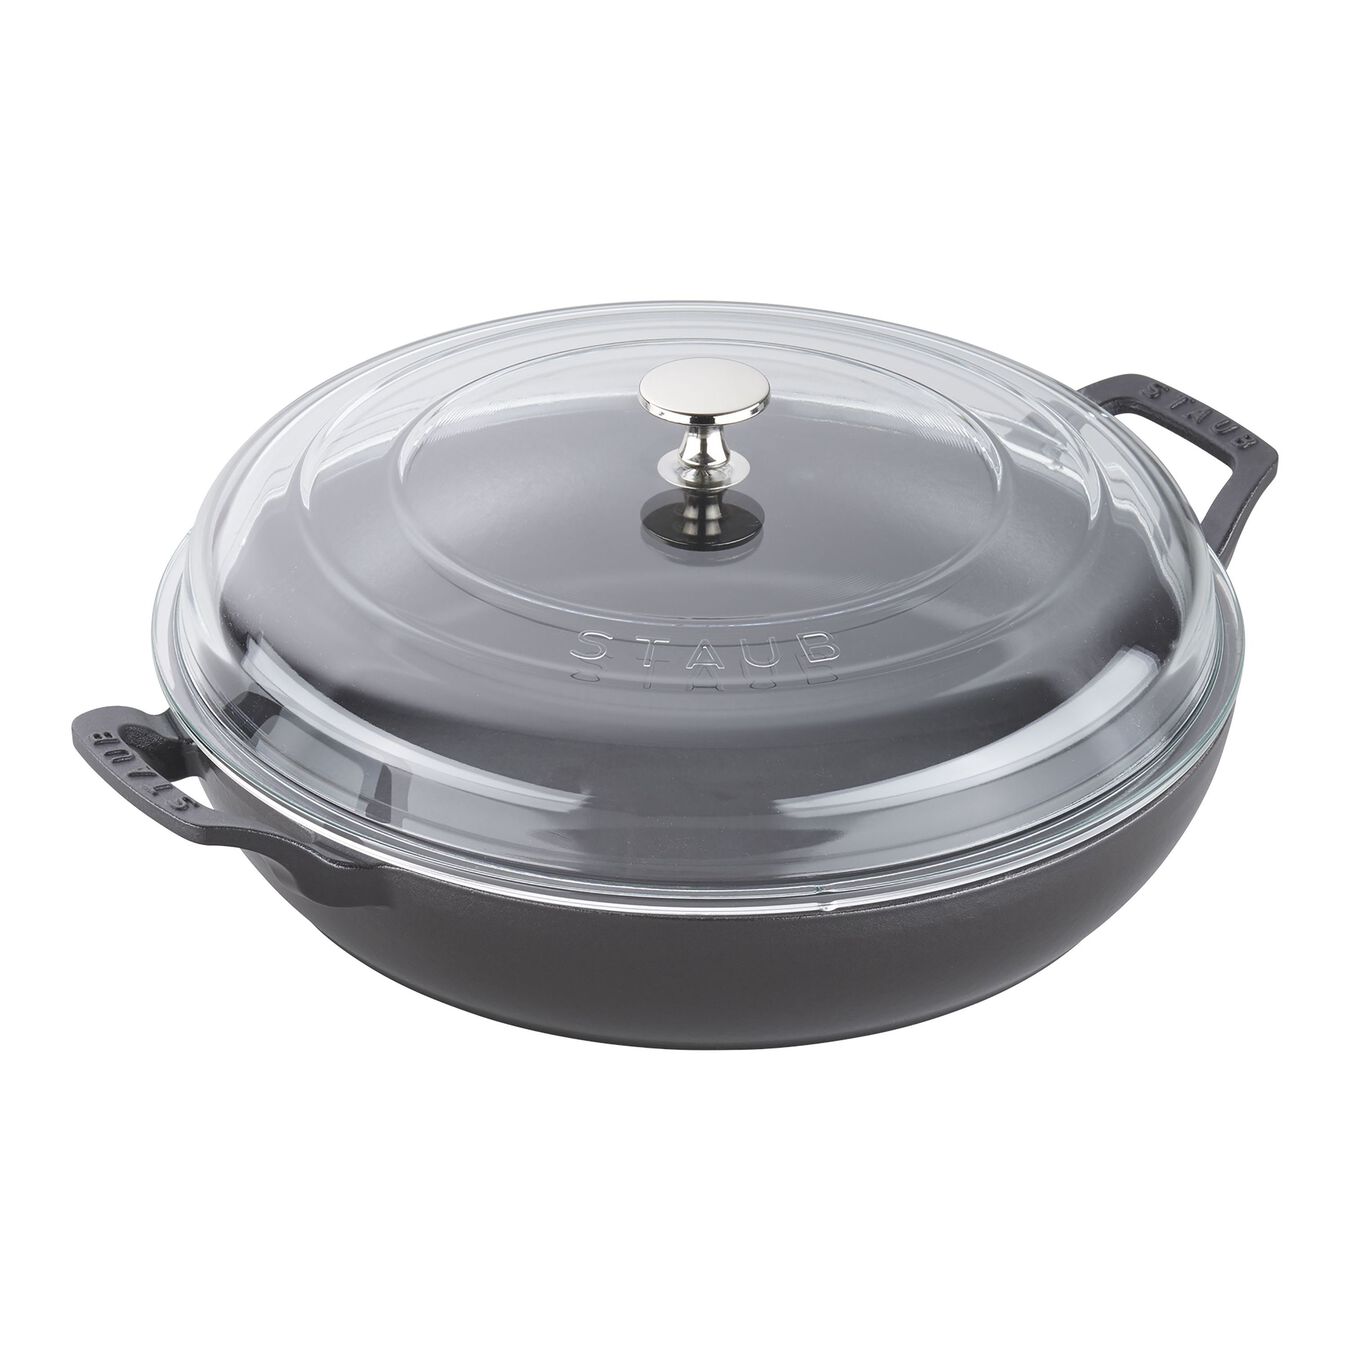 12-inch, Braiser with Glass Lid, black matte,,large 1